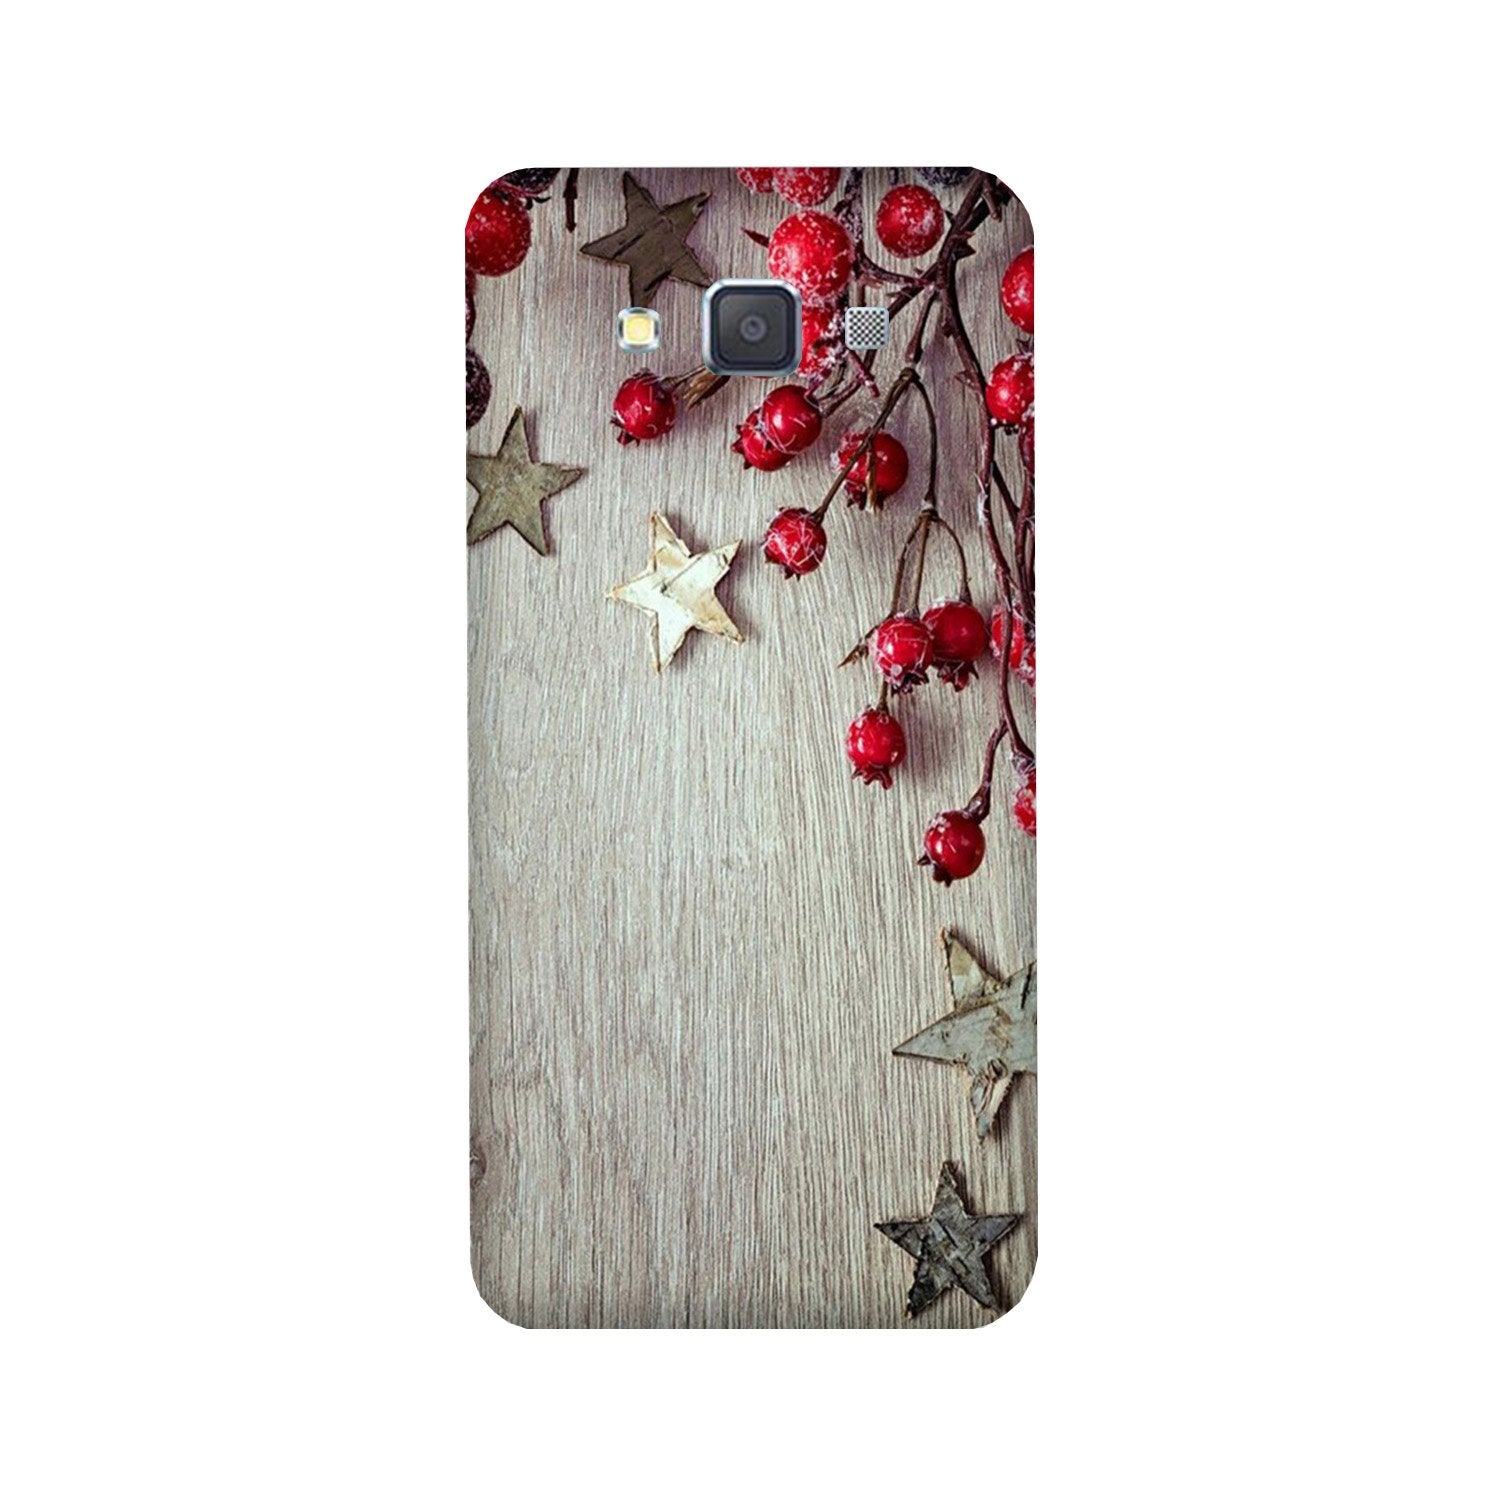 Stars Case for Galaxy ON7/ON7 Pro